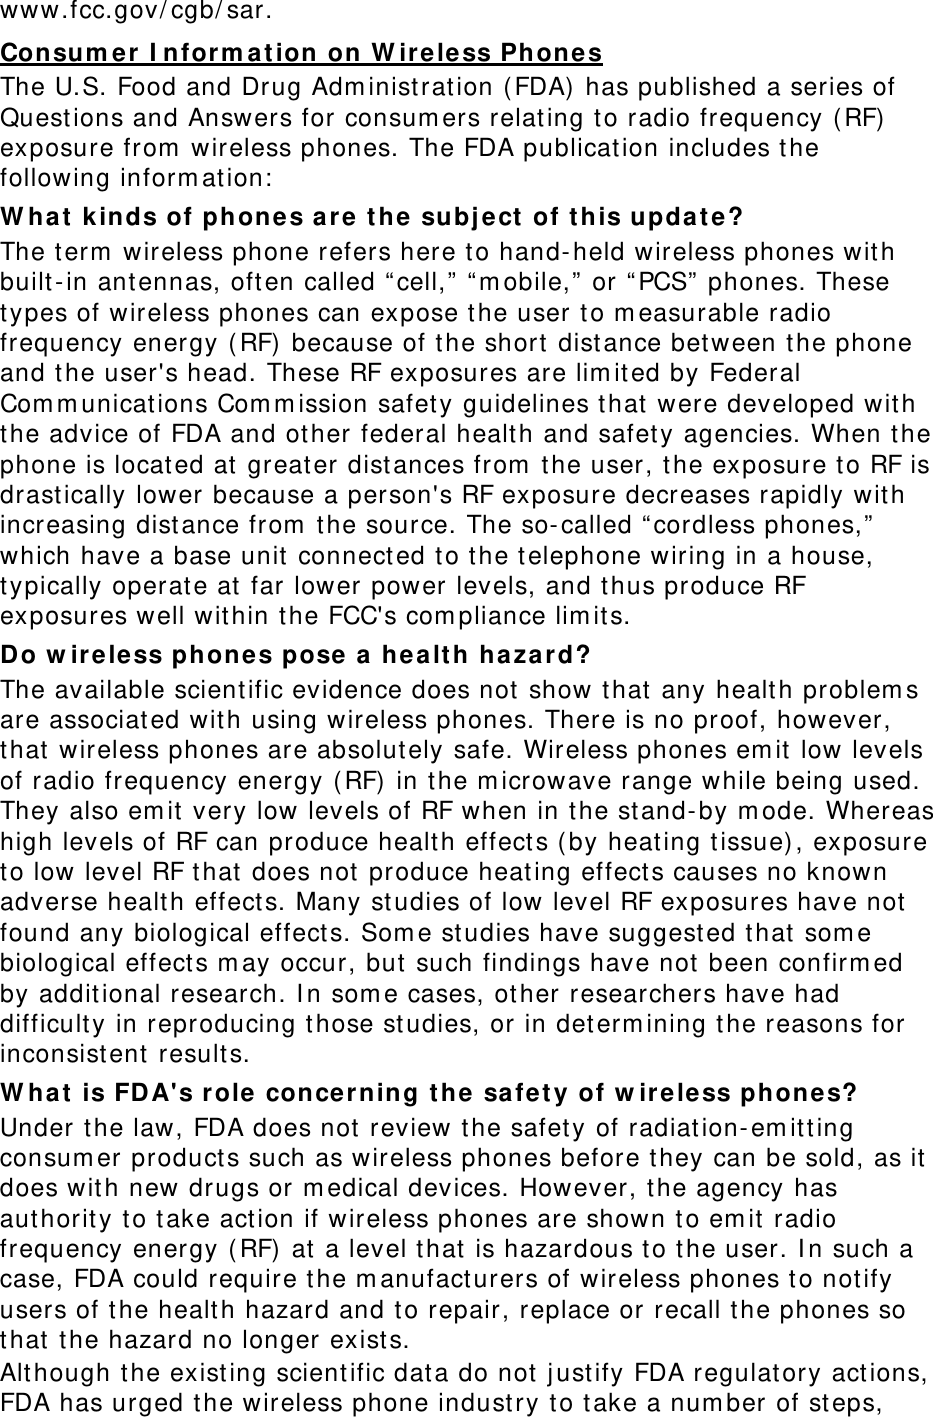 www.fcc.gov/ cgb/ sar. Consum er  I nform at ion on W ir e le ss Phones The U.S. Food and Drug Adm inistration ( FDA)  has published a series of Quest ions and Answers for consum ers relating t o radio frequency ( RF) exposure from  wireless phones. The FDA publication includes t he following inform ation:  W ha t  k inds of phone s are t he subj ect  of t his upda t e? The t erm  wireless phone refers here to hand- held wireless phones with built- in ant ennas, oft en called “ cell,”  “ m obile,”  or “ PCS”  phones. These types of wireless phones can expose t he user t o m easurable radio frequency energy ( RF)  because of t he short  dist ance between t he phone and t he user&apos;s head. These RF exposures are lim ited by Federal Com m unicat ions Com m ission safet y guidelines t hat were developed wit h the advice of FDA and other federal healt h and safet y agencies. When the phone is located at greater distances from  t he user, t he exposure to RF is drast ically lower because a person&apos;s RF exposure decreases rapidly with increasing distance from  the source. The so-called “ cordless phones,”  which have a base unit  connect ed to the t elephone wiring in a house, typically operate at  far lower power levels, and t hus produce RF exposures well within t he FCC&apos;s com pliance lim it s. Do w ire le ss phones pose  a he a lth haza rd? The available scientific evidence does not show t hat any health problem s are associated wit h using wireless phones. There is no proof, however, that  wireless phones are absolut ely safe. Wireless phones em it  low levels of radio frequency energy ( RF)  in t he m icrowave range while being used. They also em it  very low levels of RF when in t he st and- by m ode. Whereas high levels of RF can produce health effect s ( by heating tissue), exposure to low level RF t hat does not produce heat ing effect s causes no known adverse healt h effects. Many st udies of low level RF exposures have not found any biological effect s. Som e studies have suggest ed t hat som e biological effect s m ay occur, but  such findings have not  been confirm ed by additional research. I n som e cases, other researchers have had difficulty in reproducing those st udies, or in determ ining t he reasons for inconsist ent  results. W ha t  is FDA&apos;s role  concerning t he  sa fe t y of w ire le ss phones? Under t he law, FDA does not review t he safet y of radiat ion- em itt ing consum er products such as wireless phones before t hey can be sold, as it does with new drugs or m edical devices. However, t he agency has aut hority t o t ake act ion if wireless phones are shown t o em it  radio frequency energy ( RF)  at a level t hat is hazardous t o the user. I n such a case, FDA could require t he m anufact urers of wireless phones to notify users of the health hazard and t o repair, replace or recall t he phones so that  t he hazard no longer exist s. Alt hough t he exist ing scient ific dat a do not j ust ify FDA regulat ory actions, FDA has urged the wireless phone industry t o t ake a num ber of st eps, 